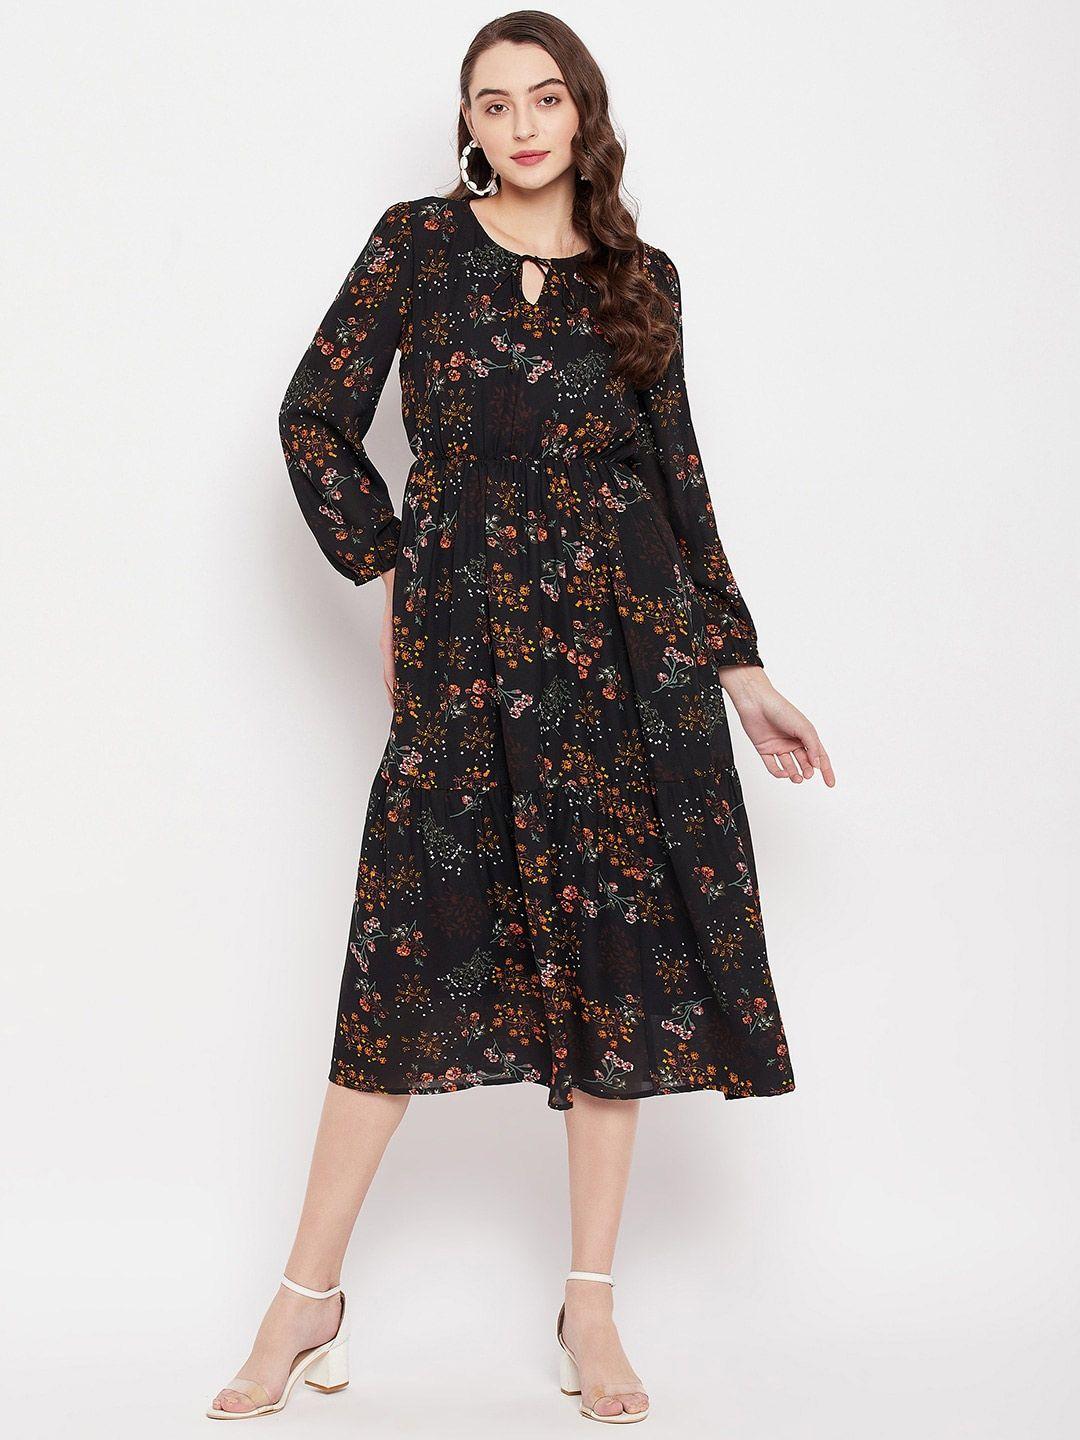 style blush floral print keyhole neck puff sleeves a-line dress